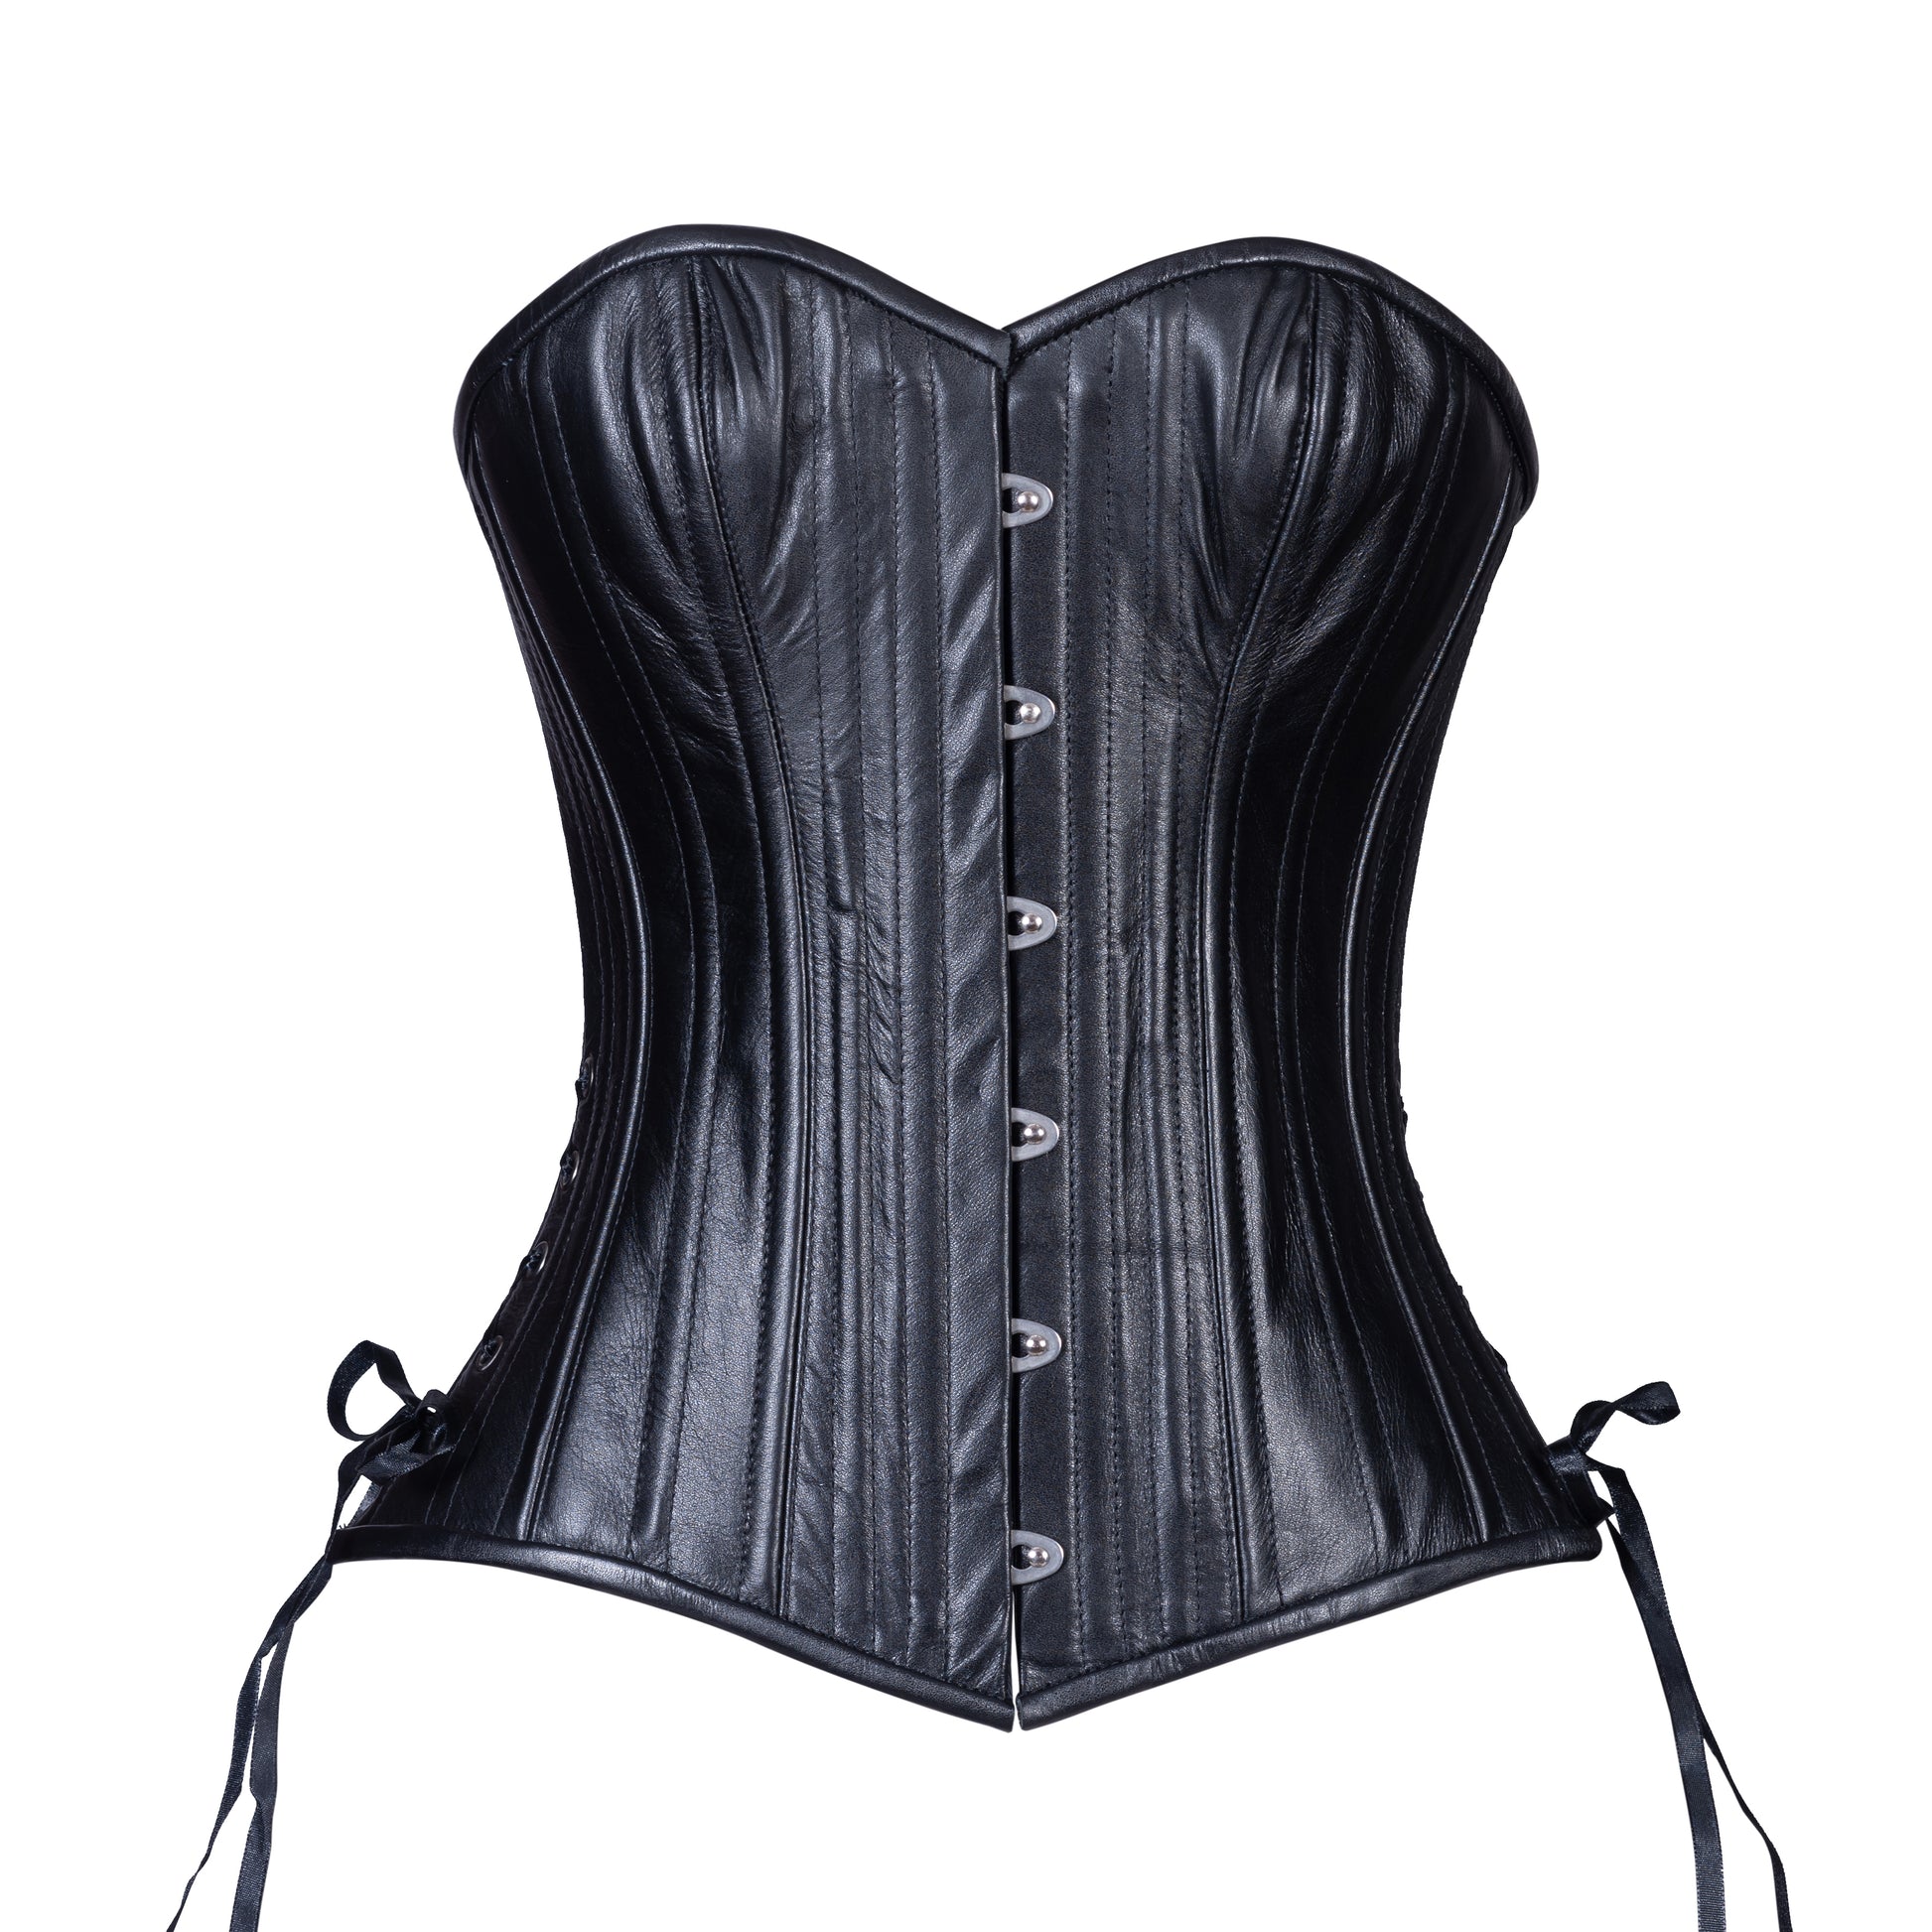 help! do i size down or is this corset just made wrong? : r/corsetry